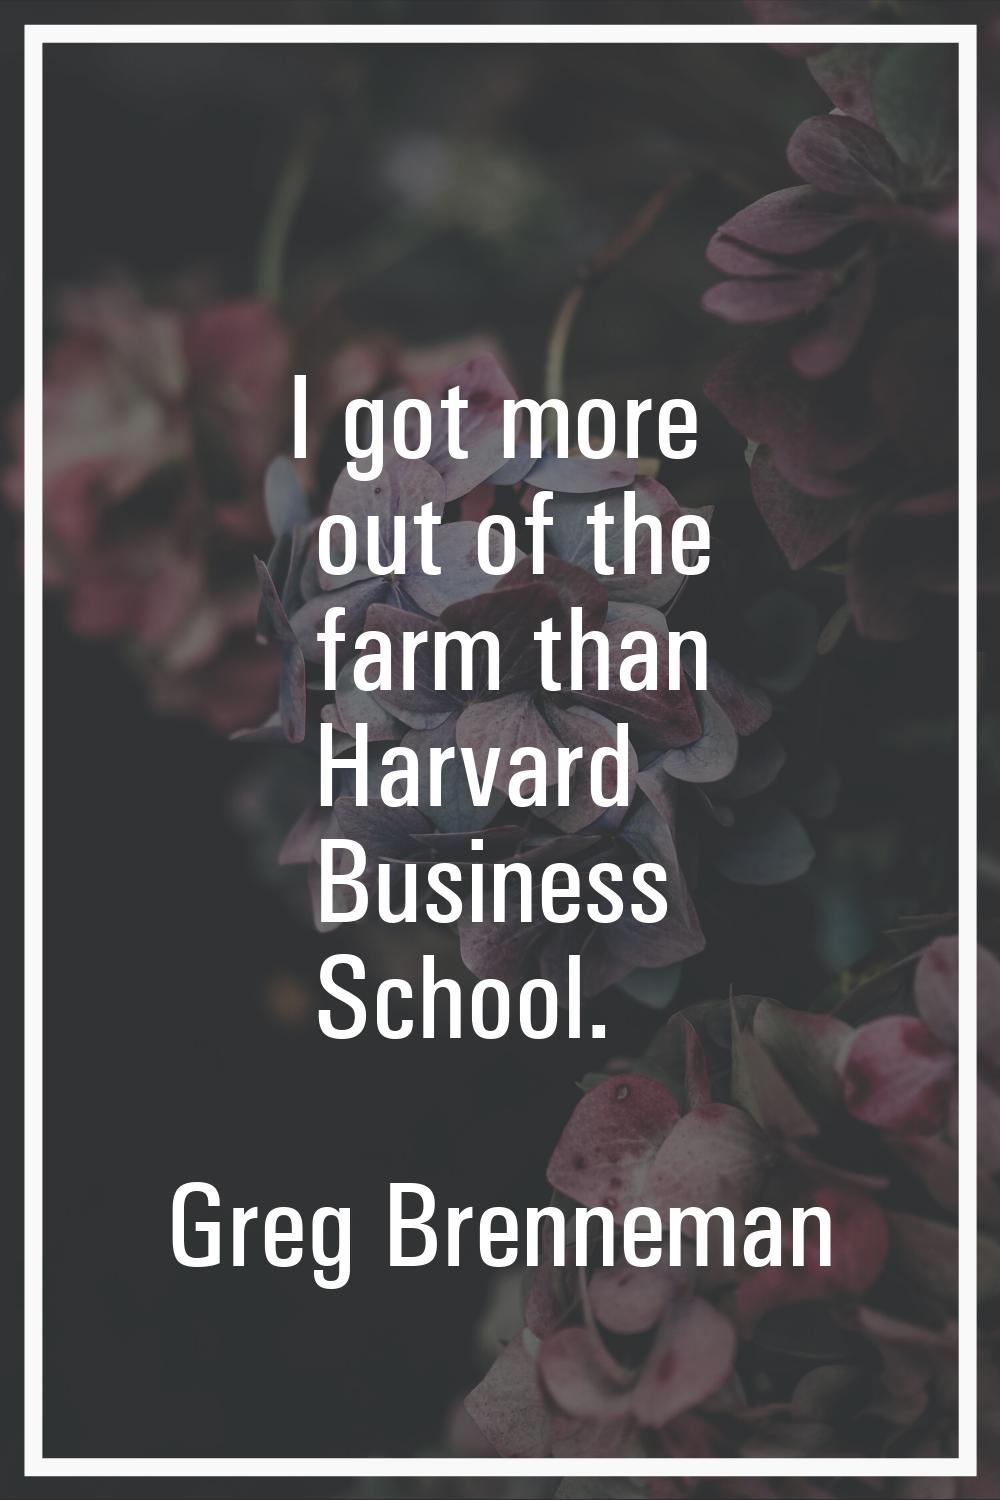 I got more out of the farm than Harvard Business School.